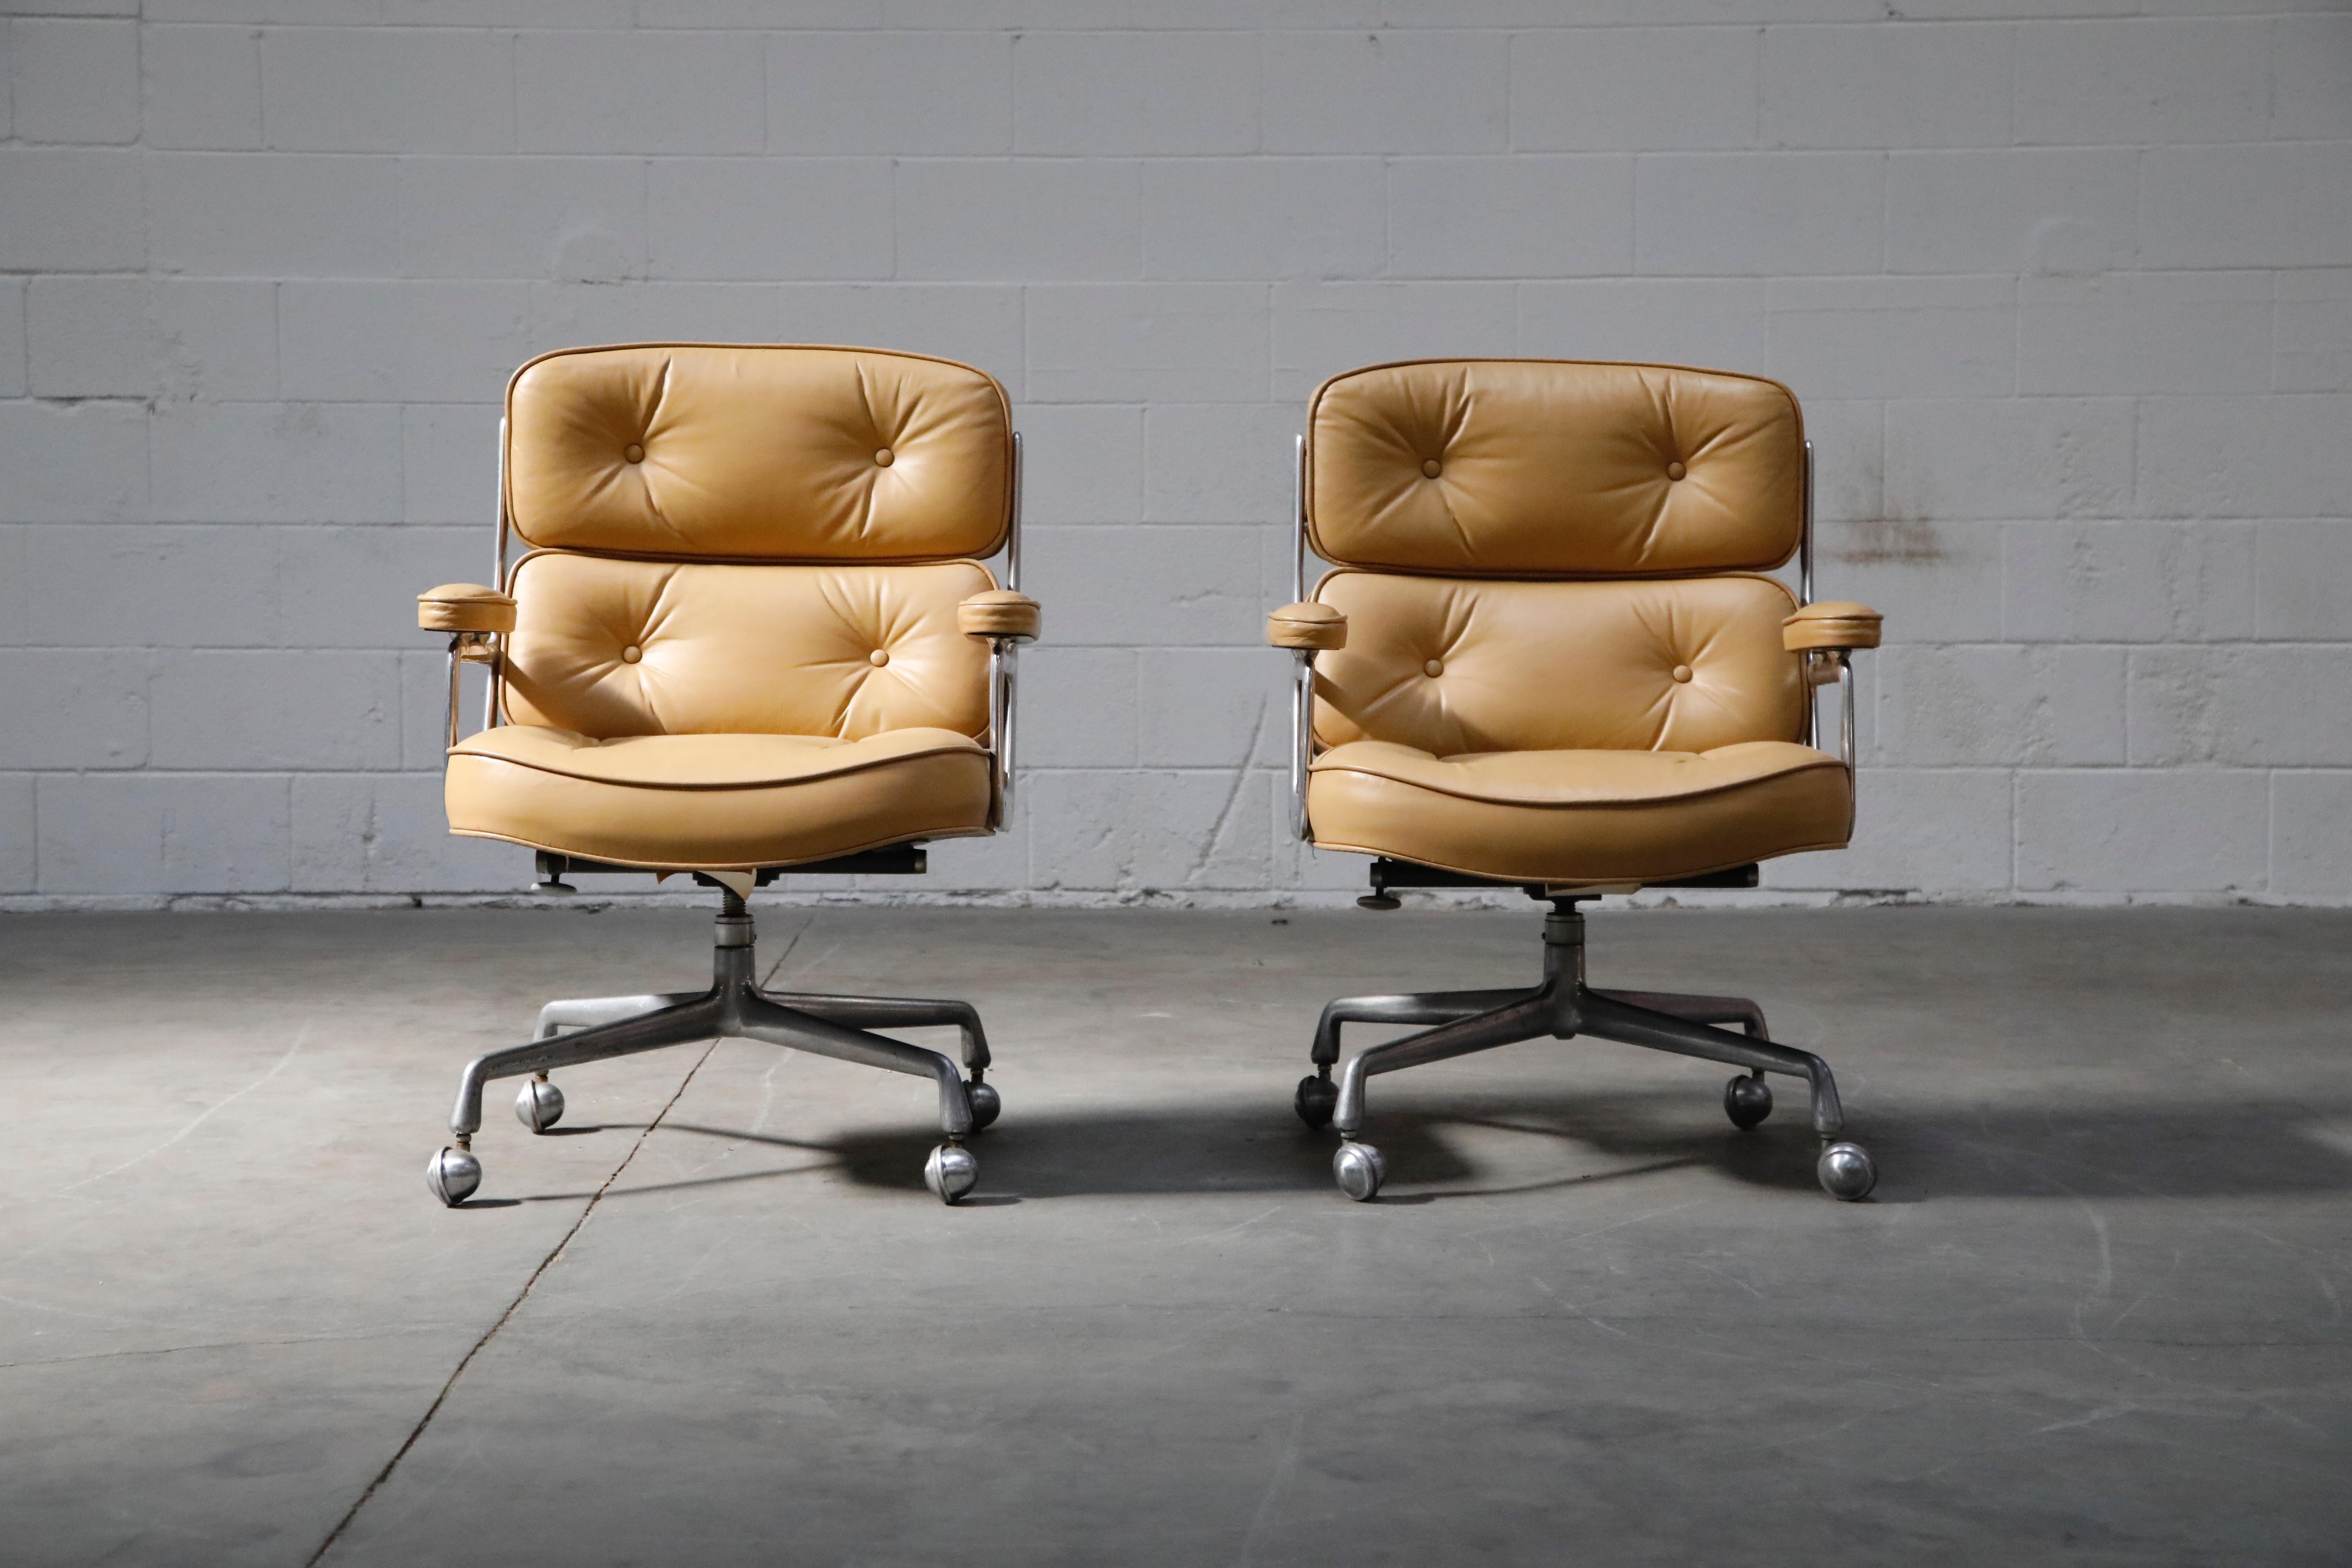 This wonderful set of 'Time Life' executive desk chairs was designed by Charles Eames in 1959 and manufactured by Herman Miller. This set features its original tan colored leather over aluminum frames with tilt function, casters and height